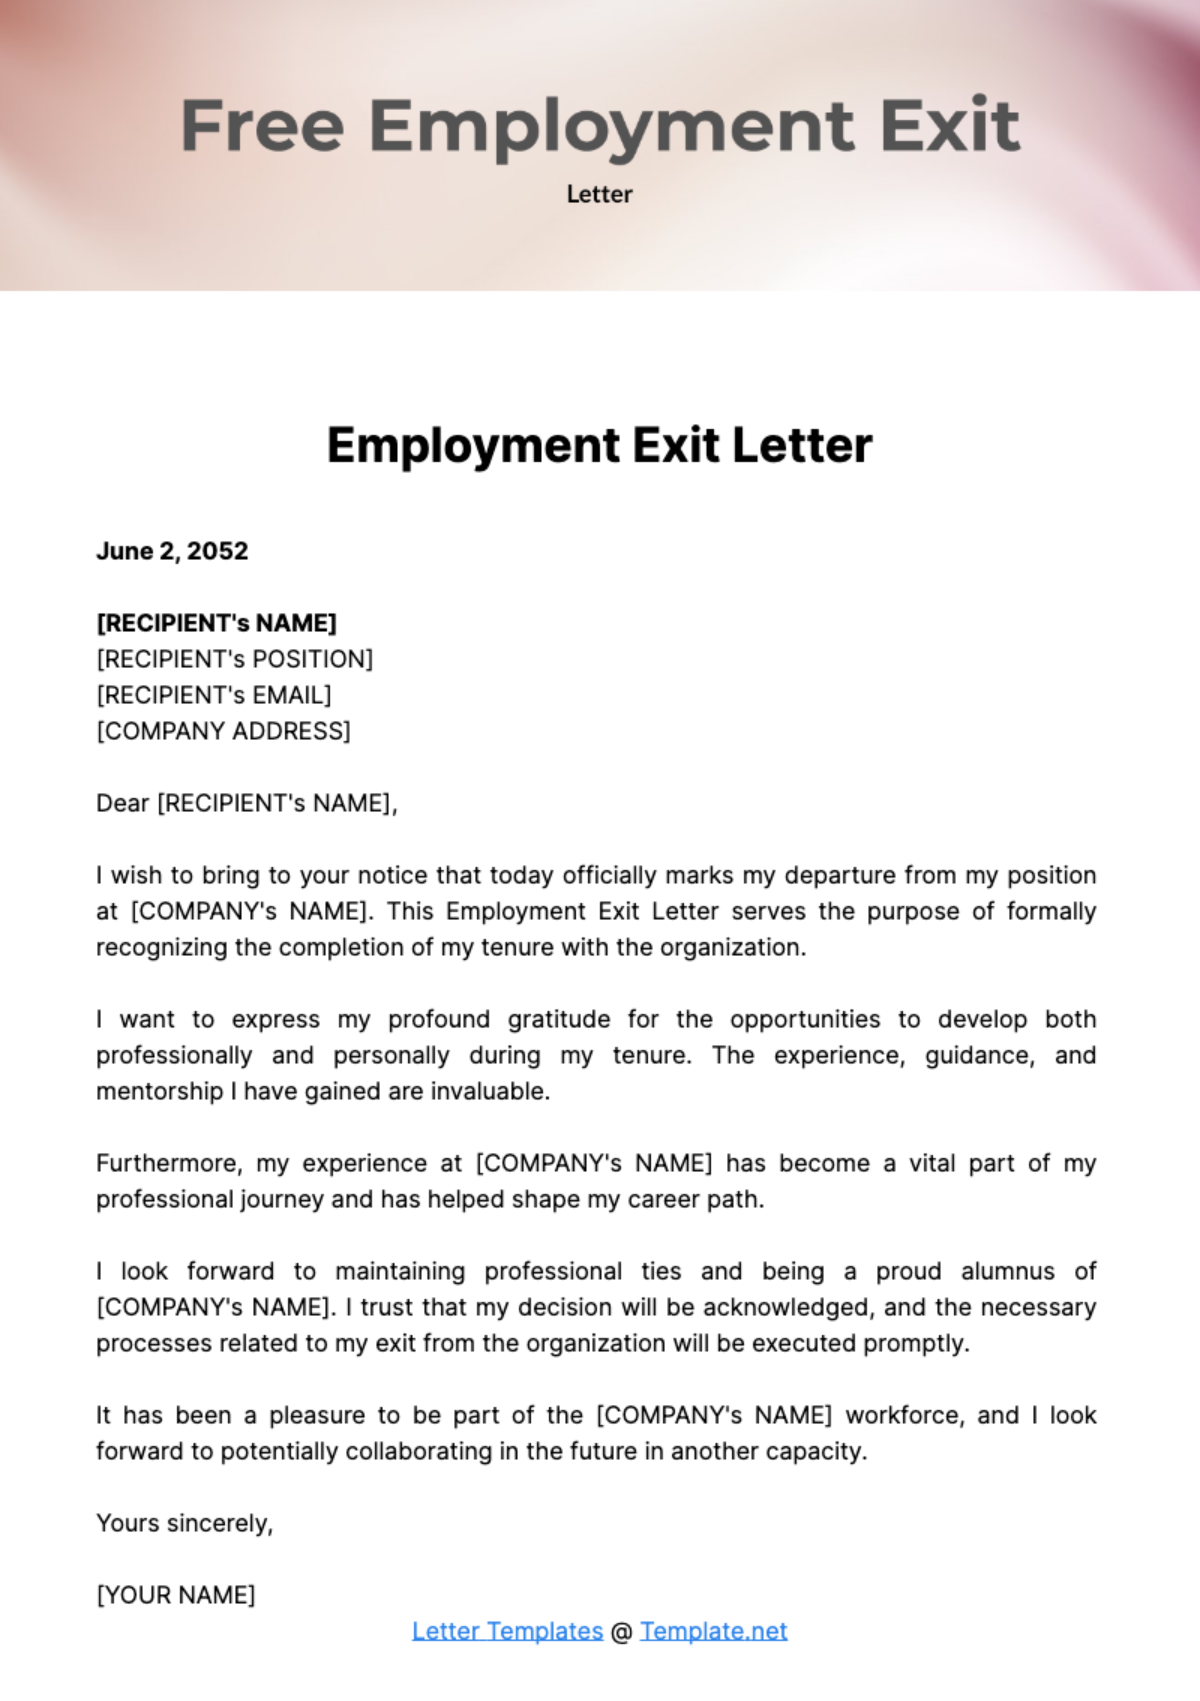 Free Employment Exit Letter Template